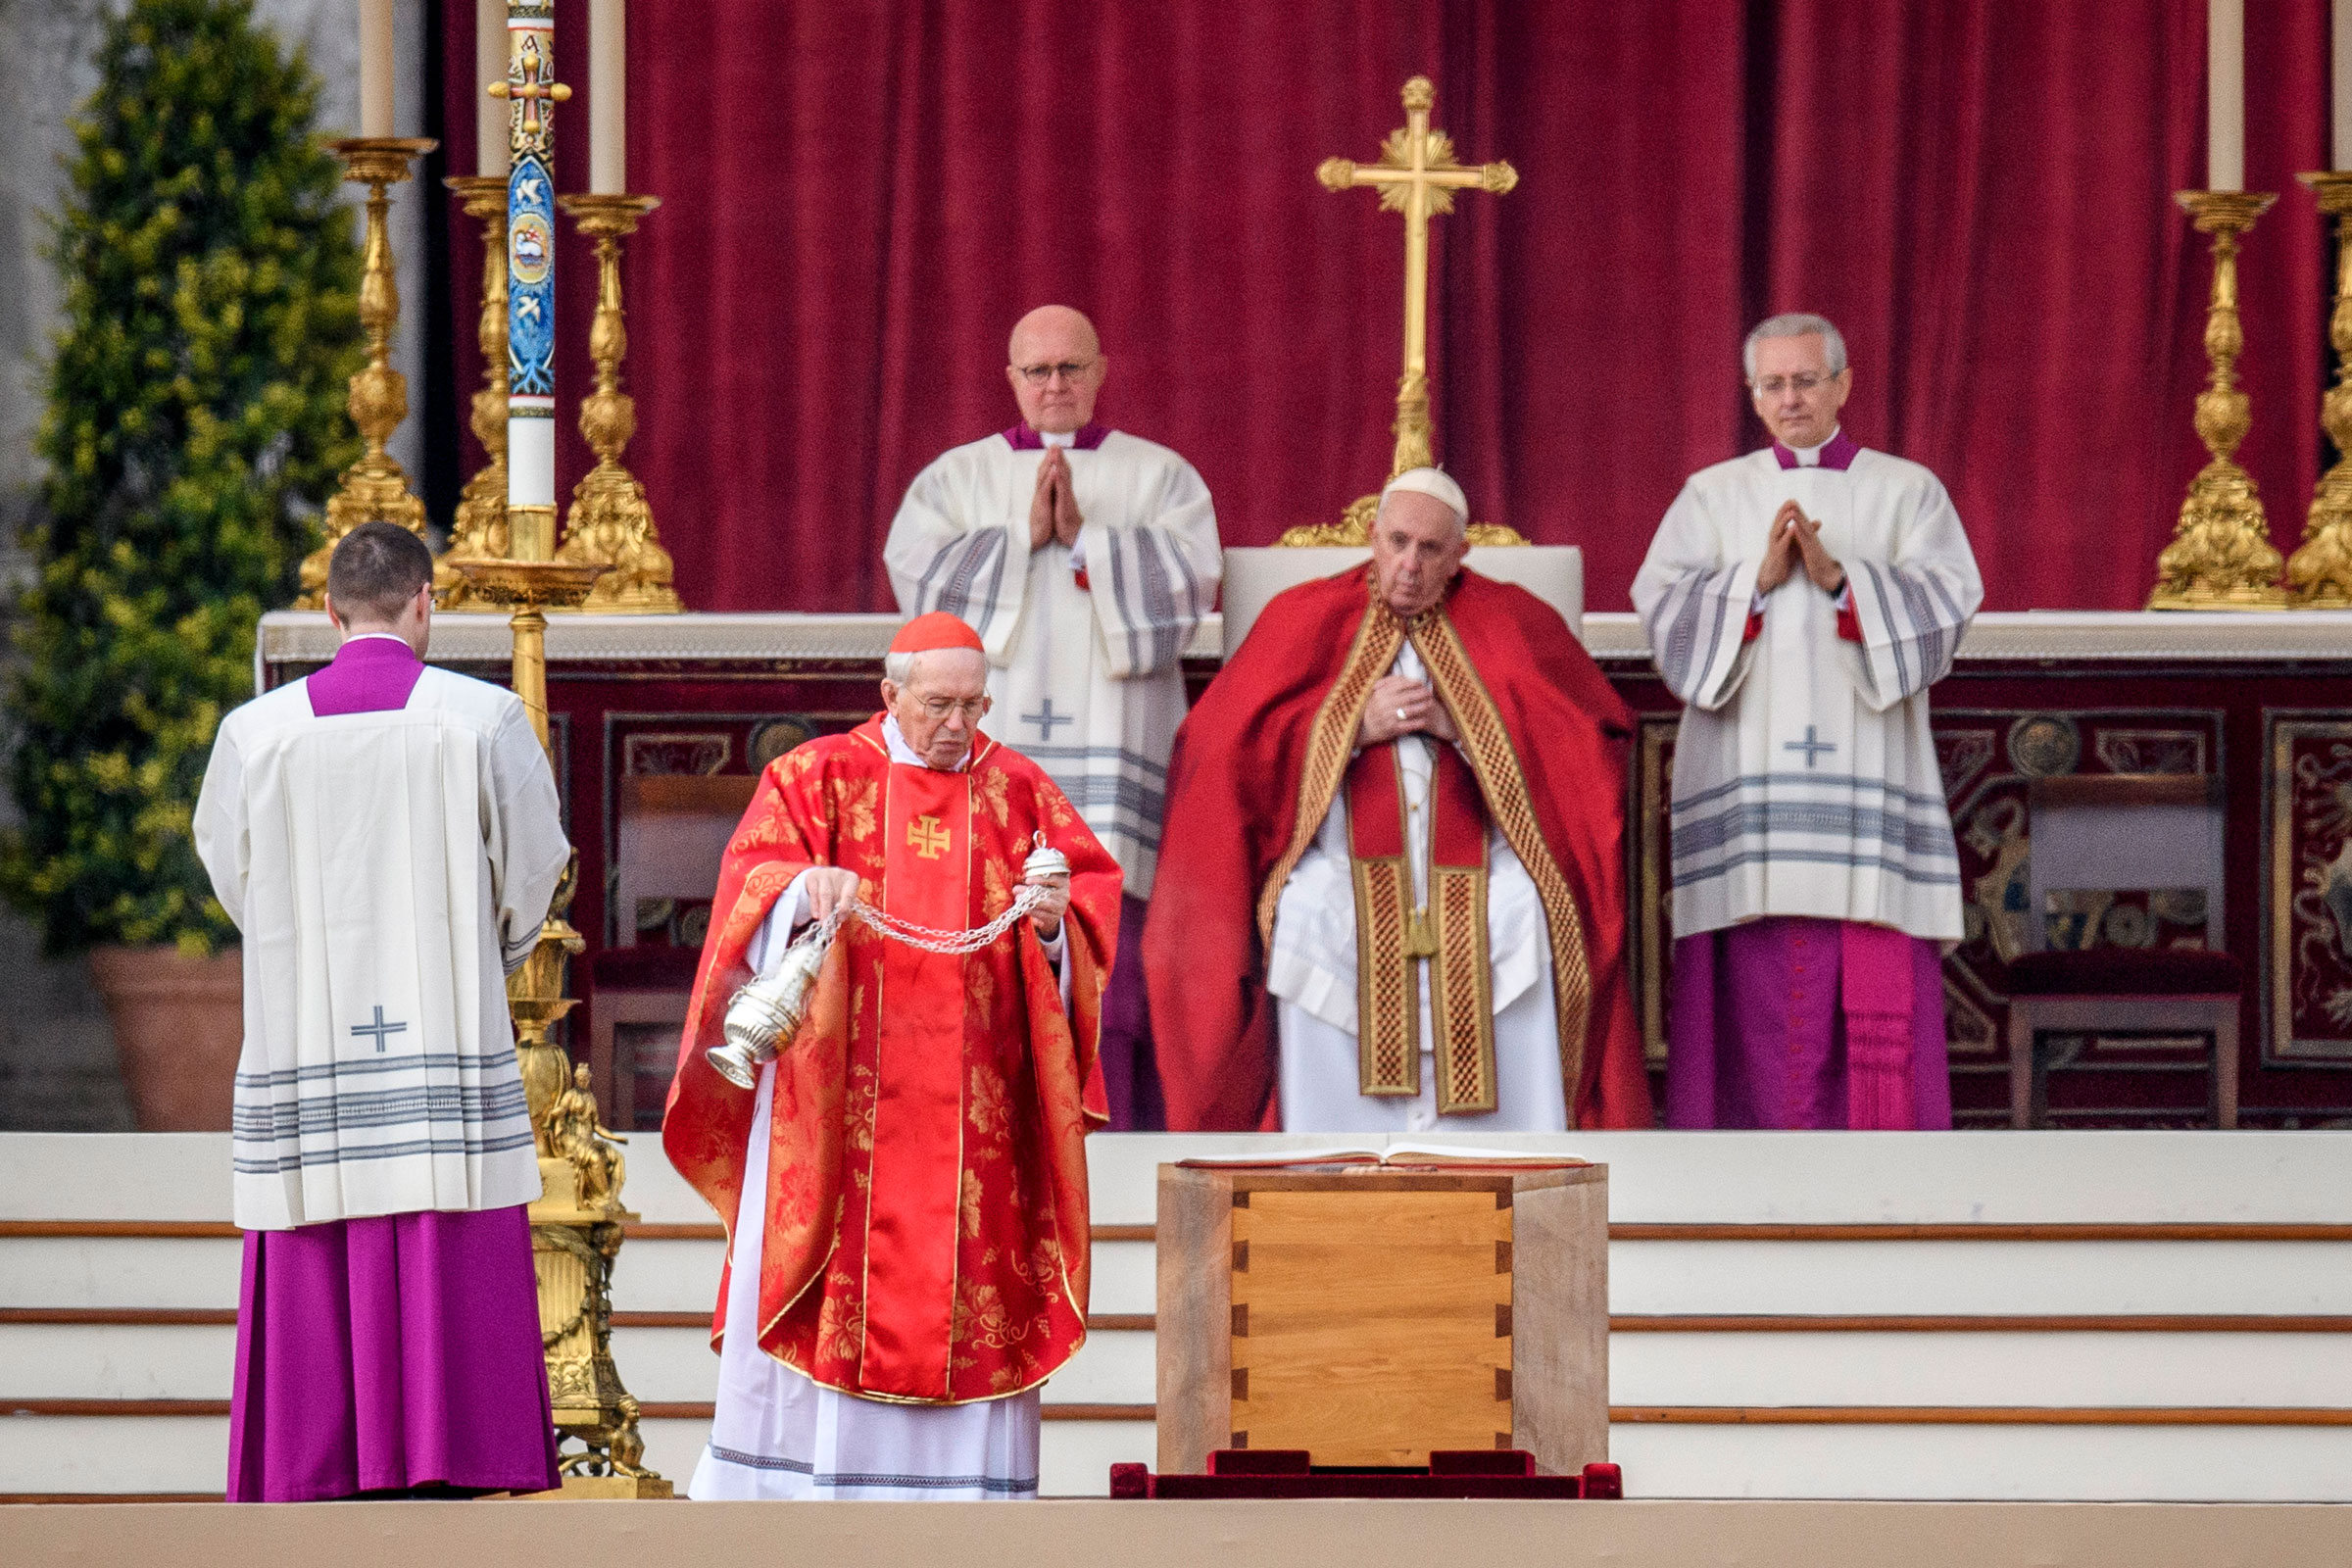 Cardinal Giovanni Battista Re swings a thurible of incense on the coffin of Pope Emeritus Benedict XVI during the funeral mass at St. Peter's square on Jan. 5, 2023 in Vatican City.